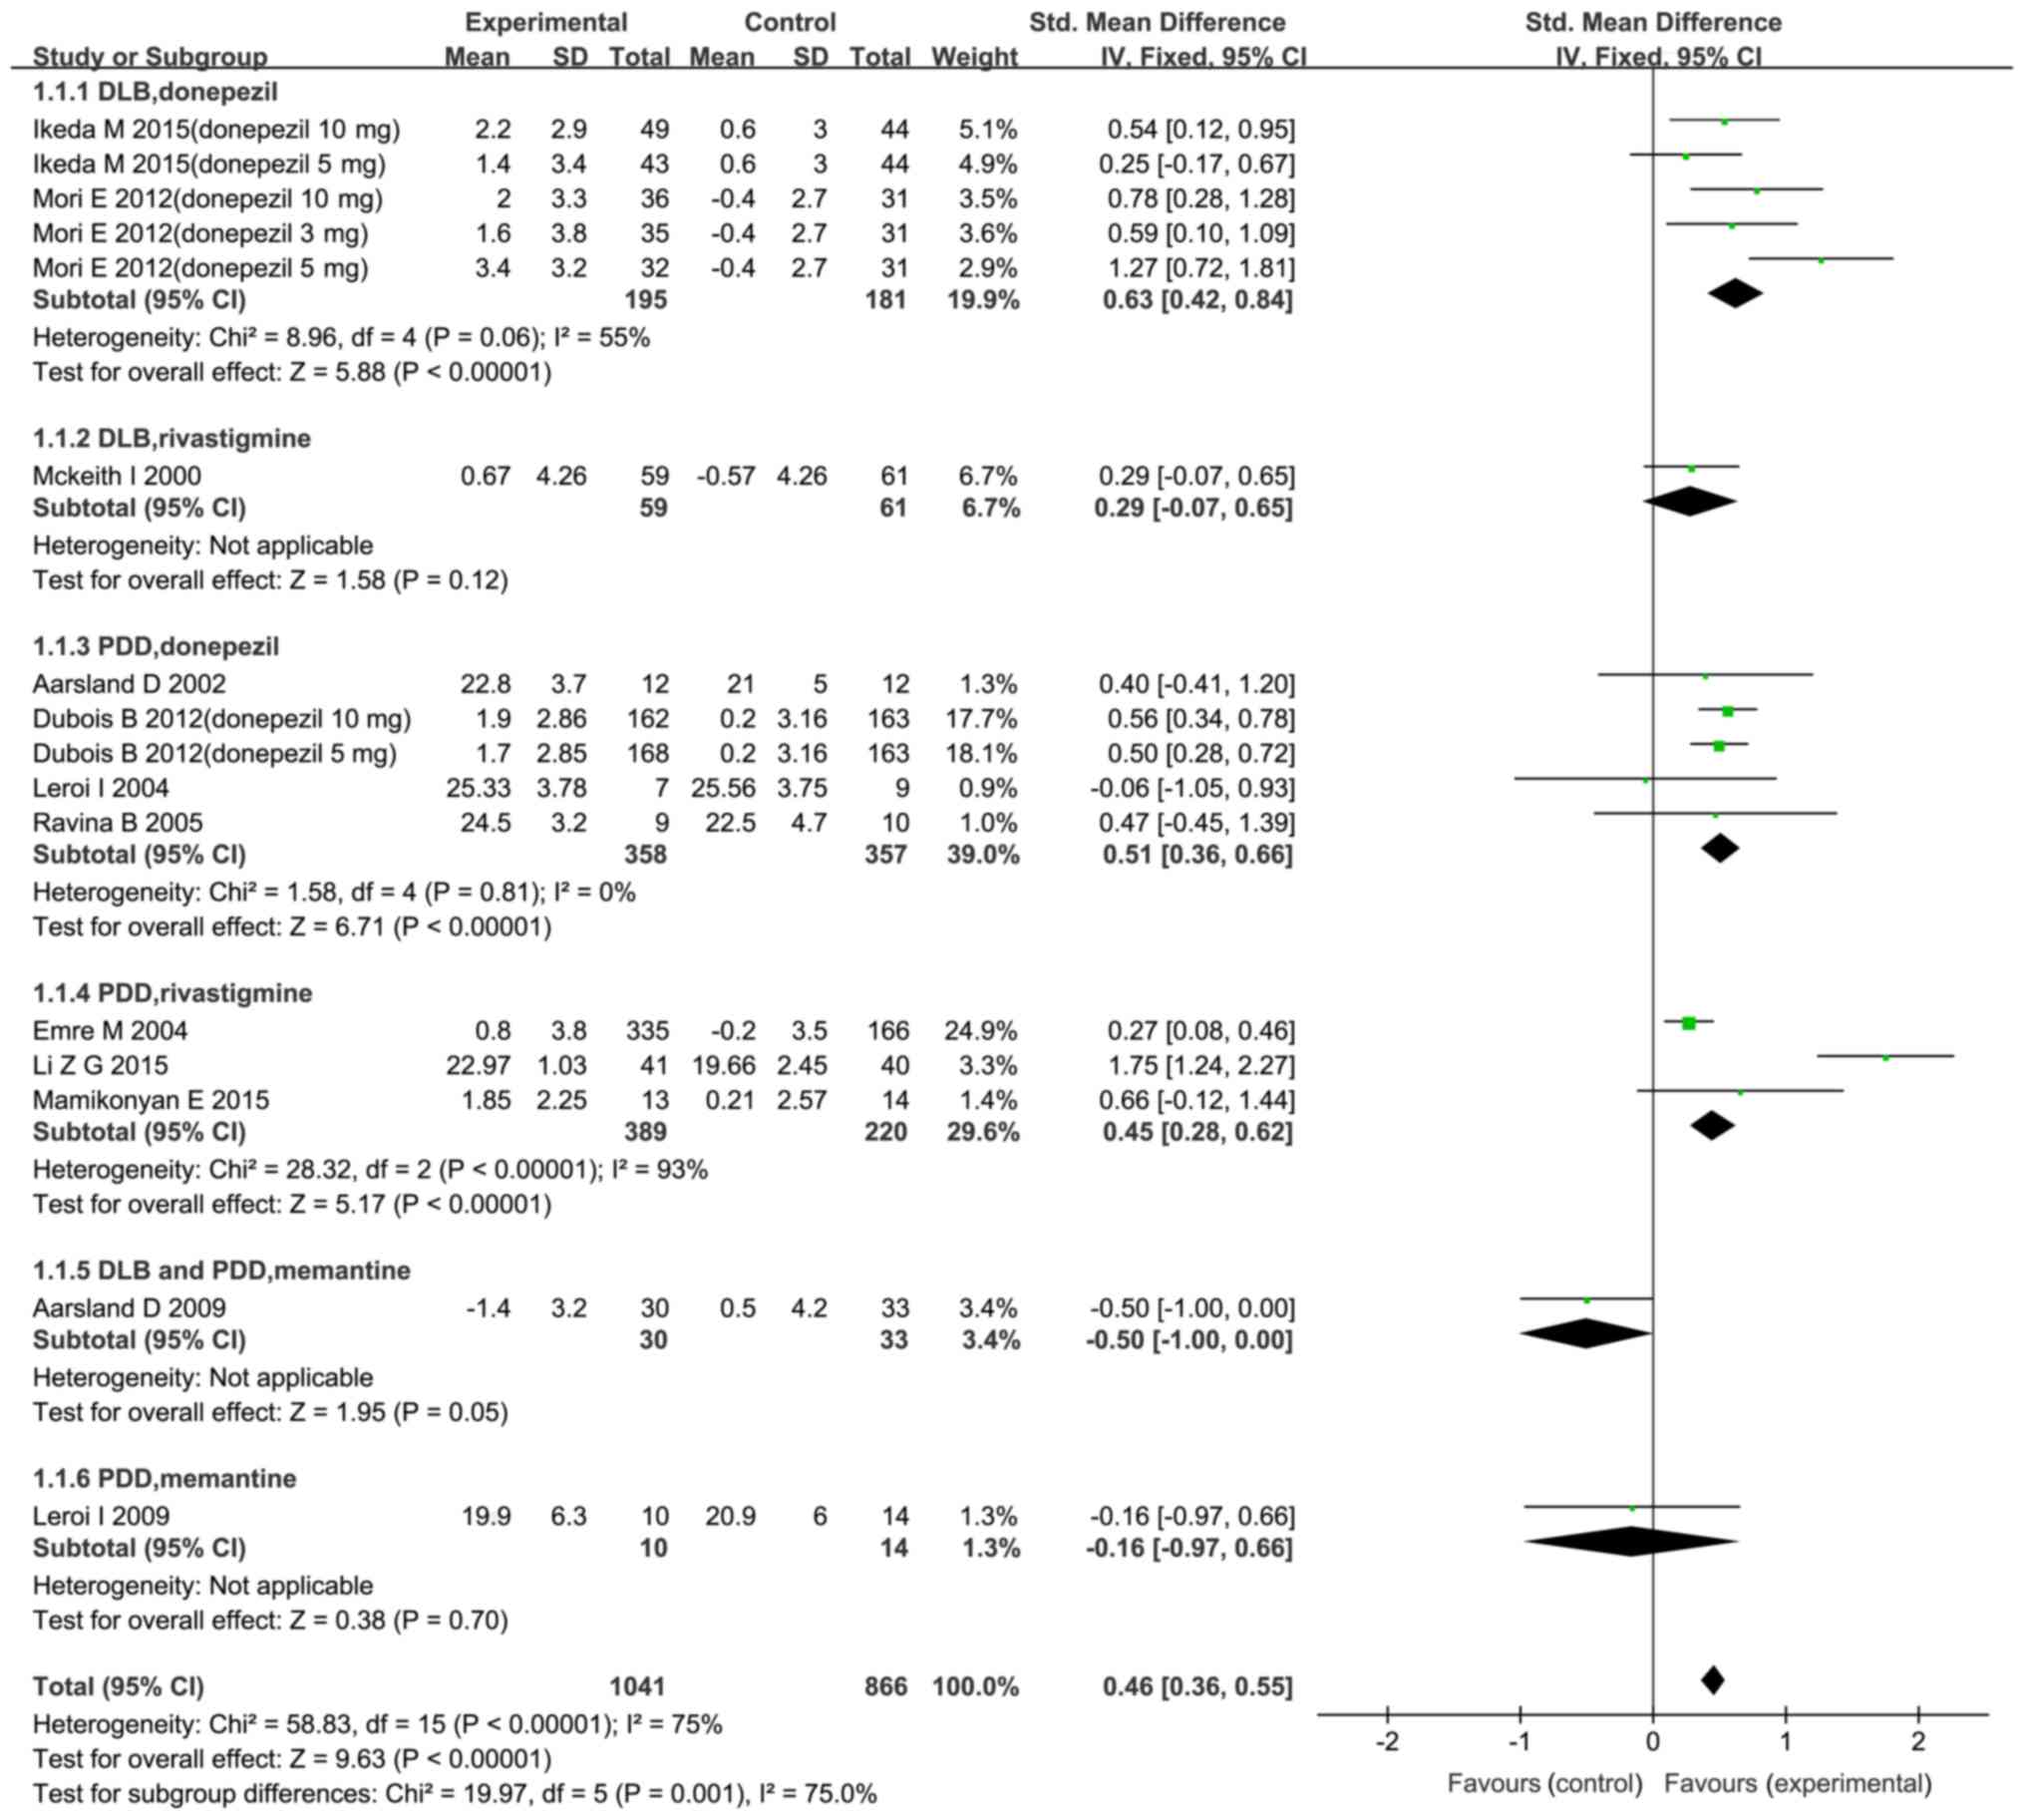 Cholinesterase Inhibitors And Memantine For Parkinson S Disease Dementia And Lewy Body Dementia A Meta Analysis